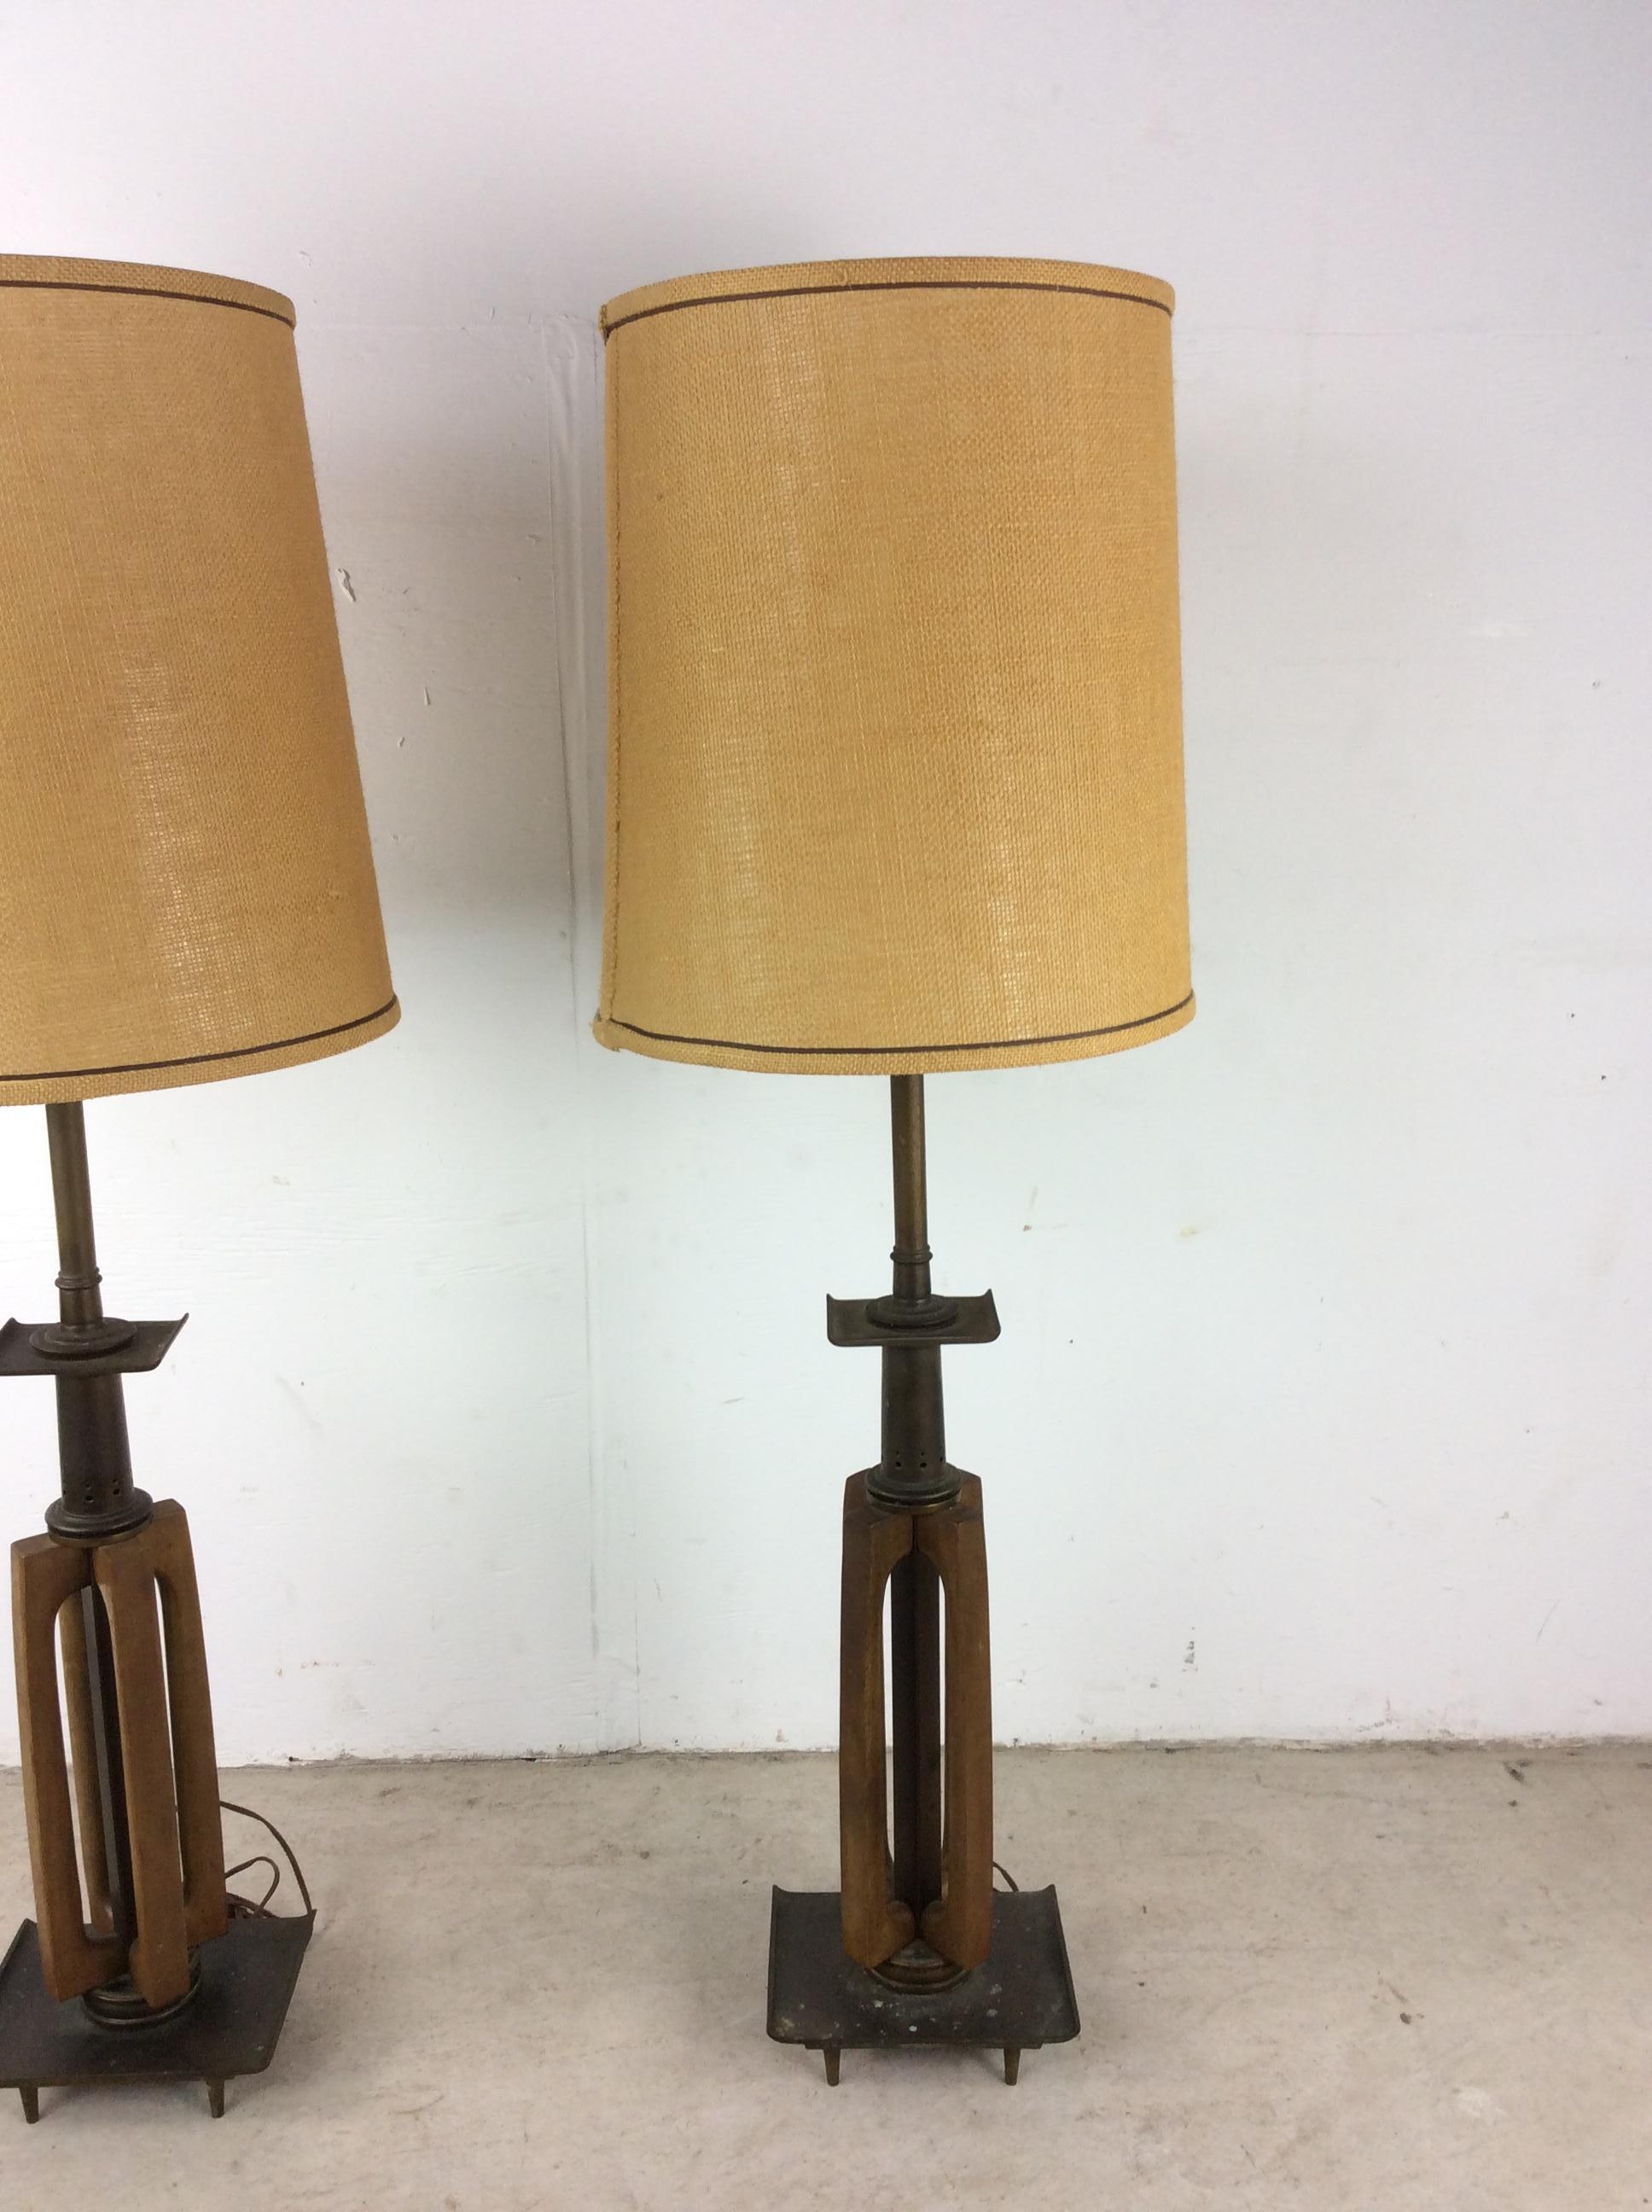 Pair of Tall Mid Century Modern Brass & Walnut Table Lamps For Sale 2